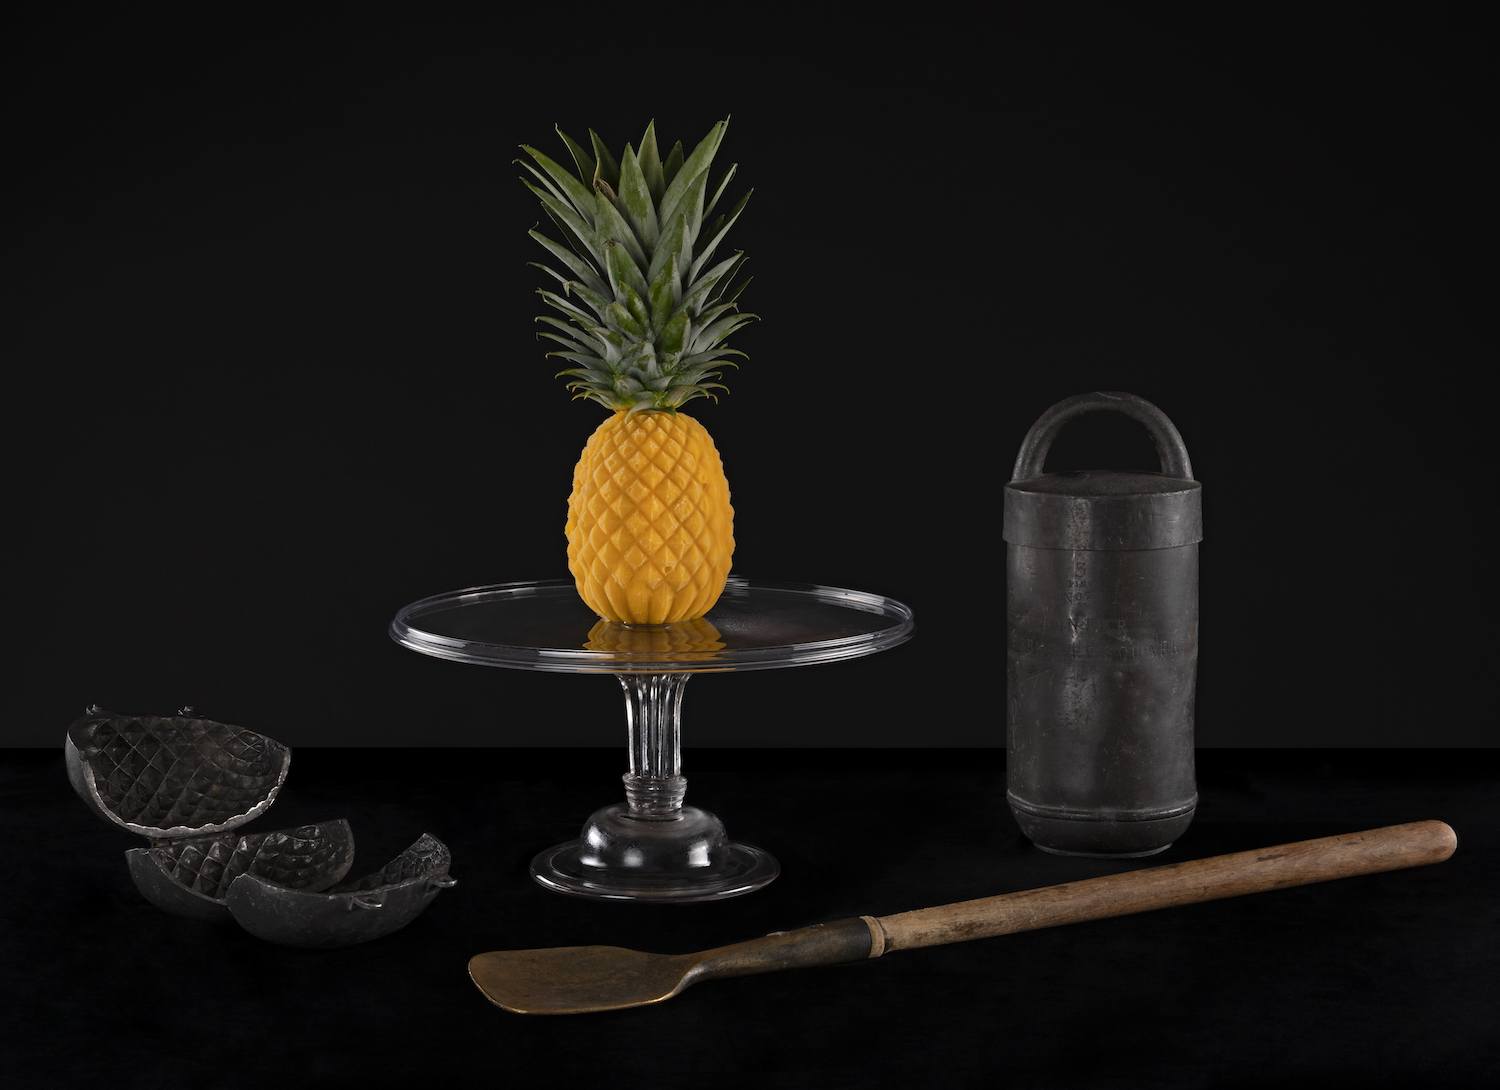 The pineapple is an essential motif of the exhibition.